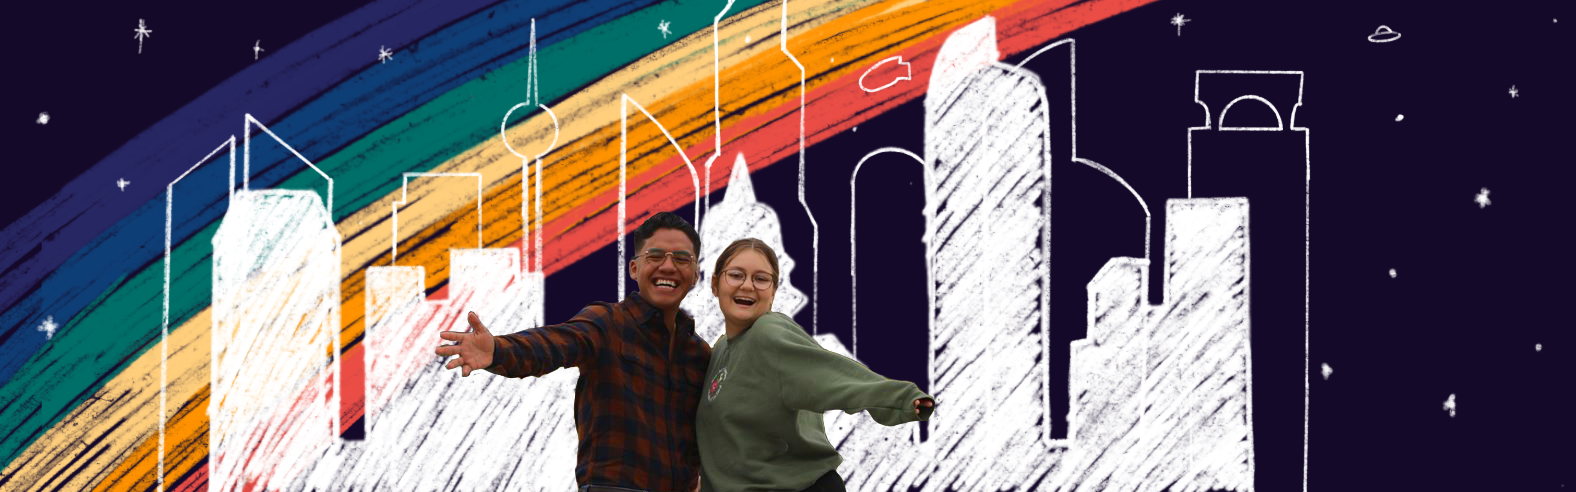 Mixed Media image of Cu Denver SGA leader Juan Gonzalez and Morgan DeVito with a colorful rainbow and city skyline illustation